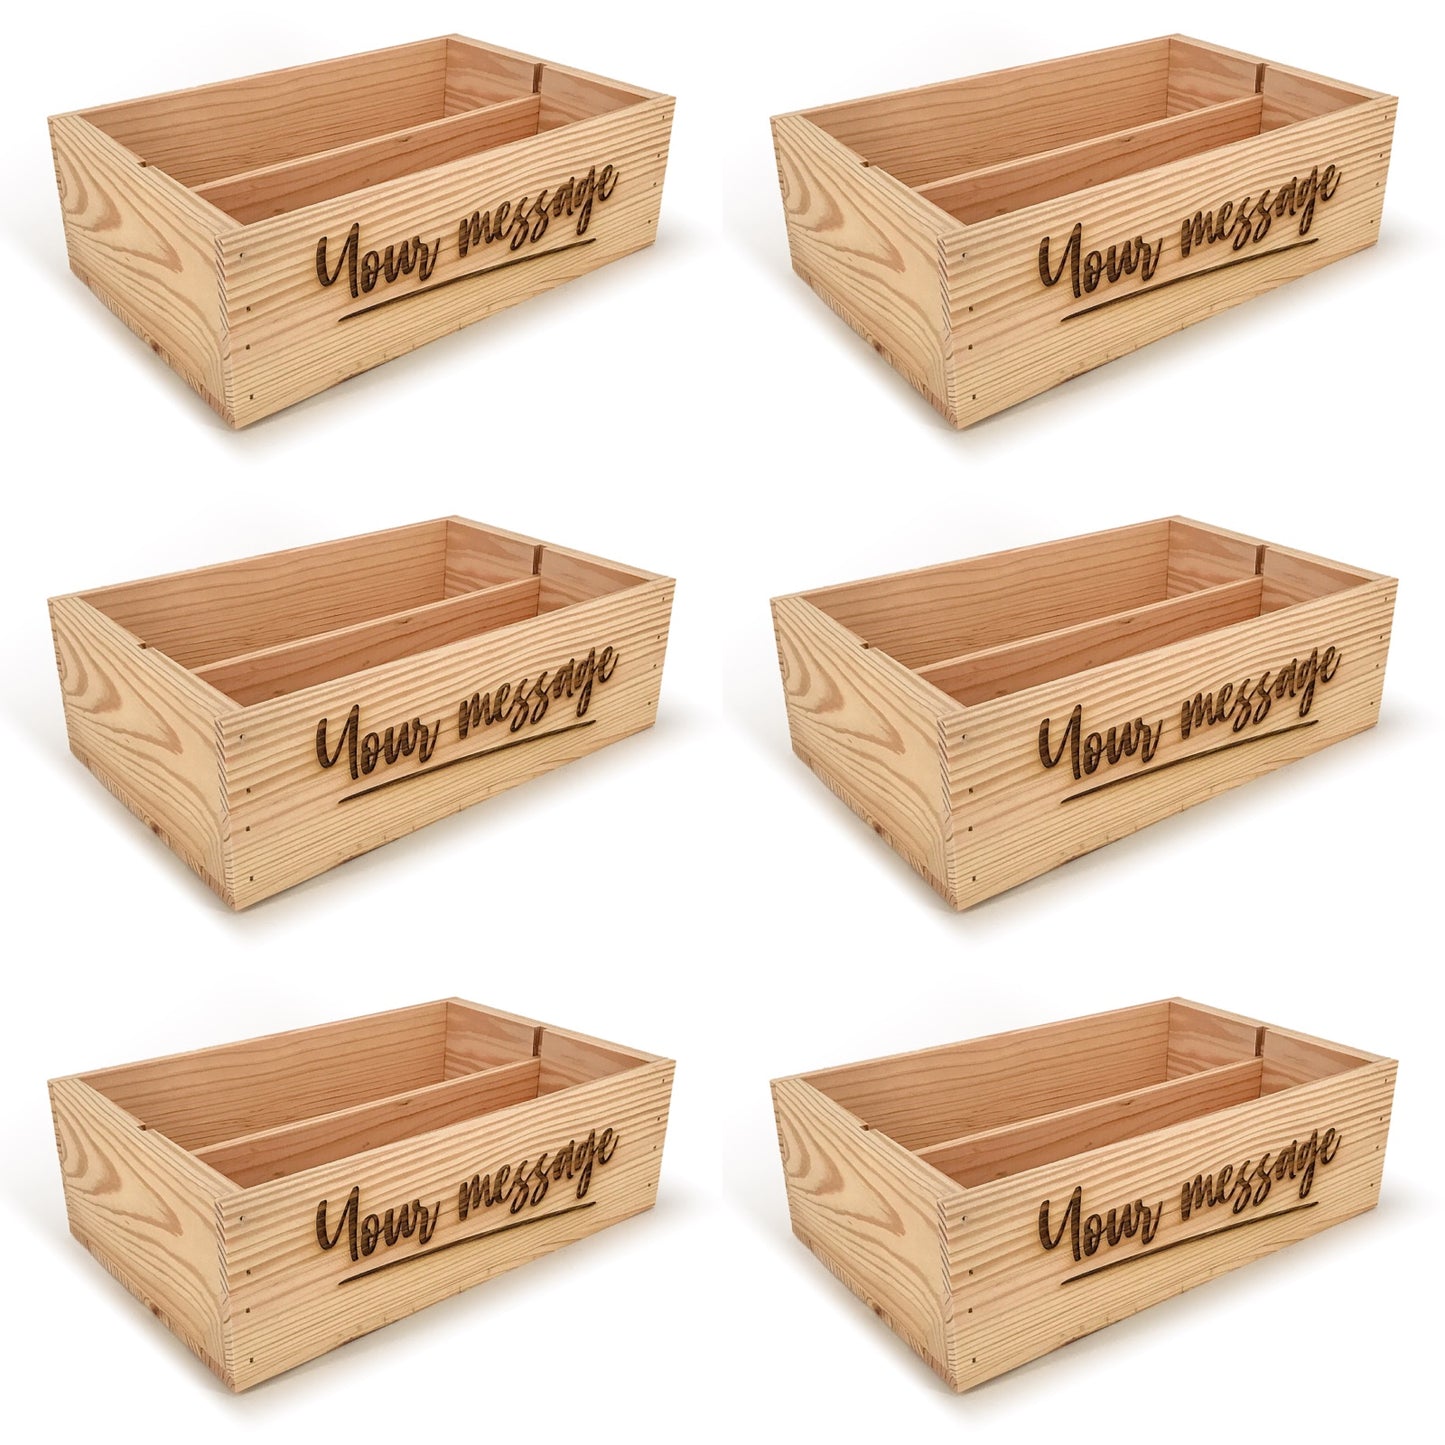 6 Two Bottle Wine Crate Boxes with Custom Message 14x9x4.5, 6-WB-14-9-4.5-ST-NW-NL,  12-WB-14-9-4.5-ST-NW-NL,  24-WB-14-9-4.5-ST-NW-NL,  48-WB-14-9-4.5-ST-NW-NL,  96-WB-14-9-4.5-ST-NW-NL